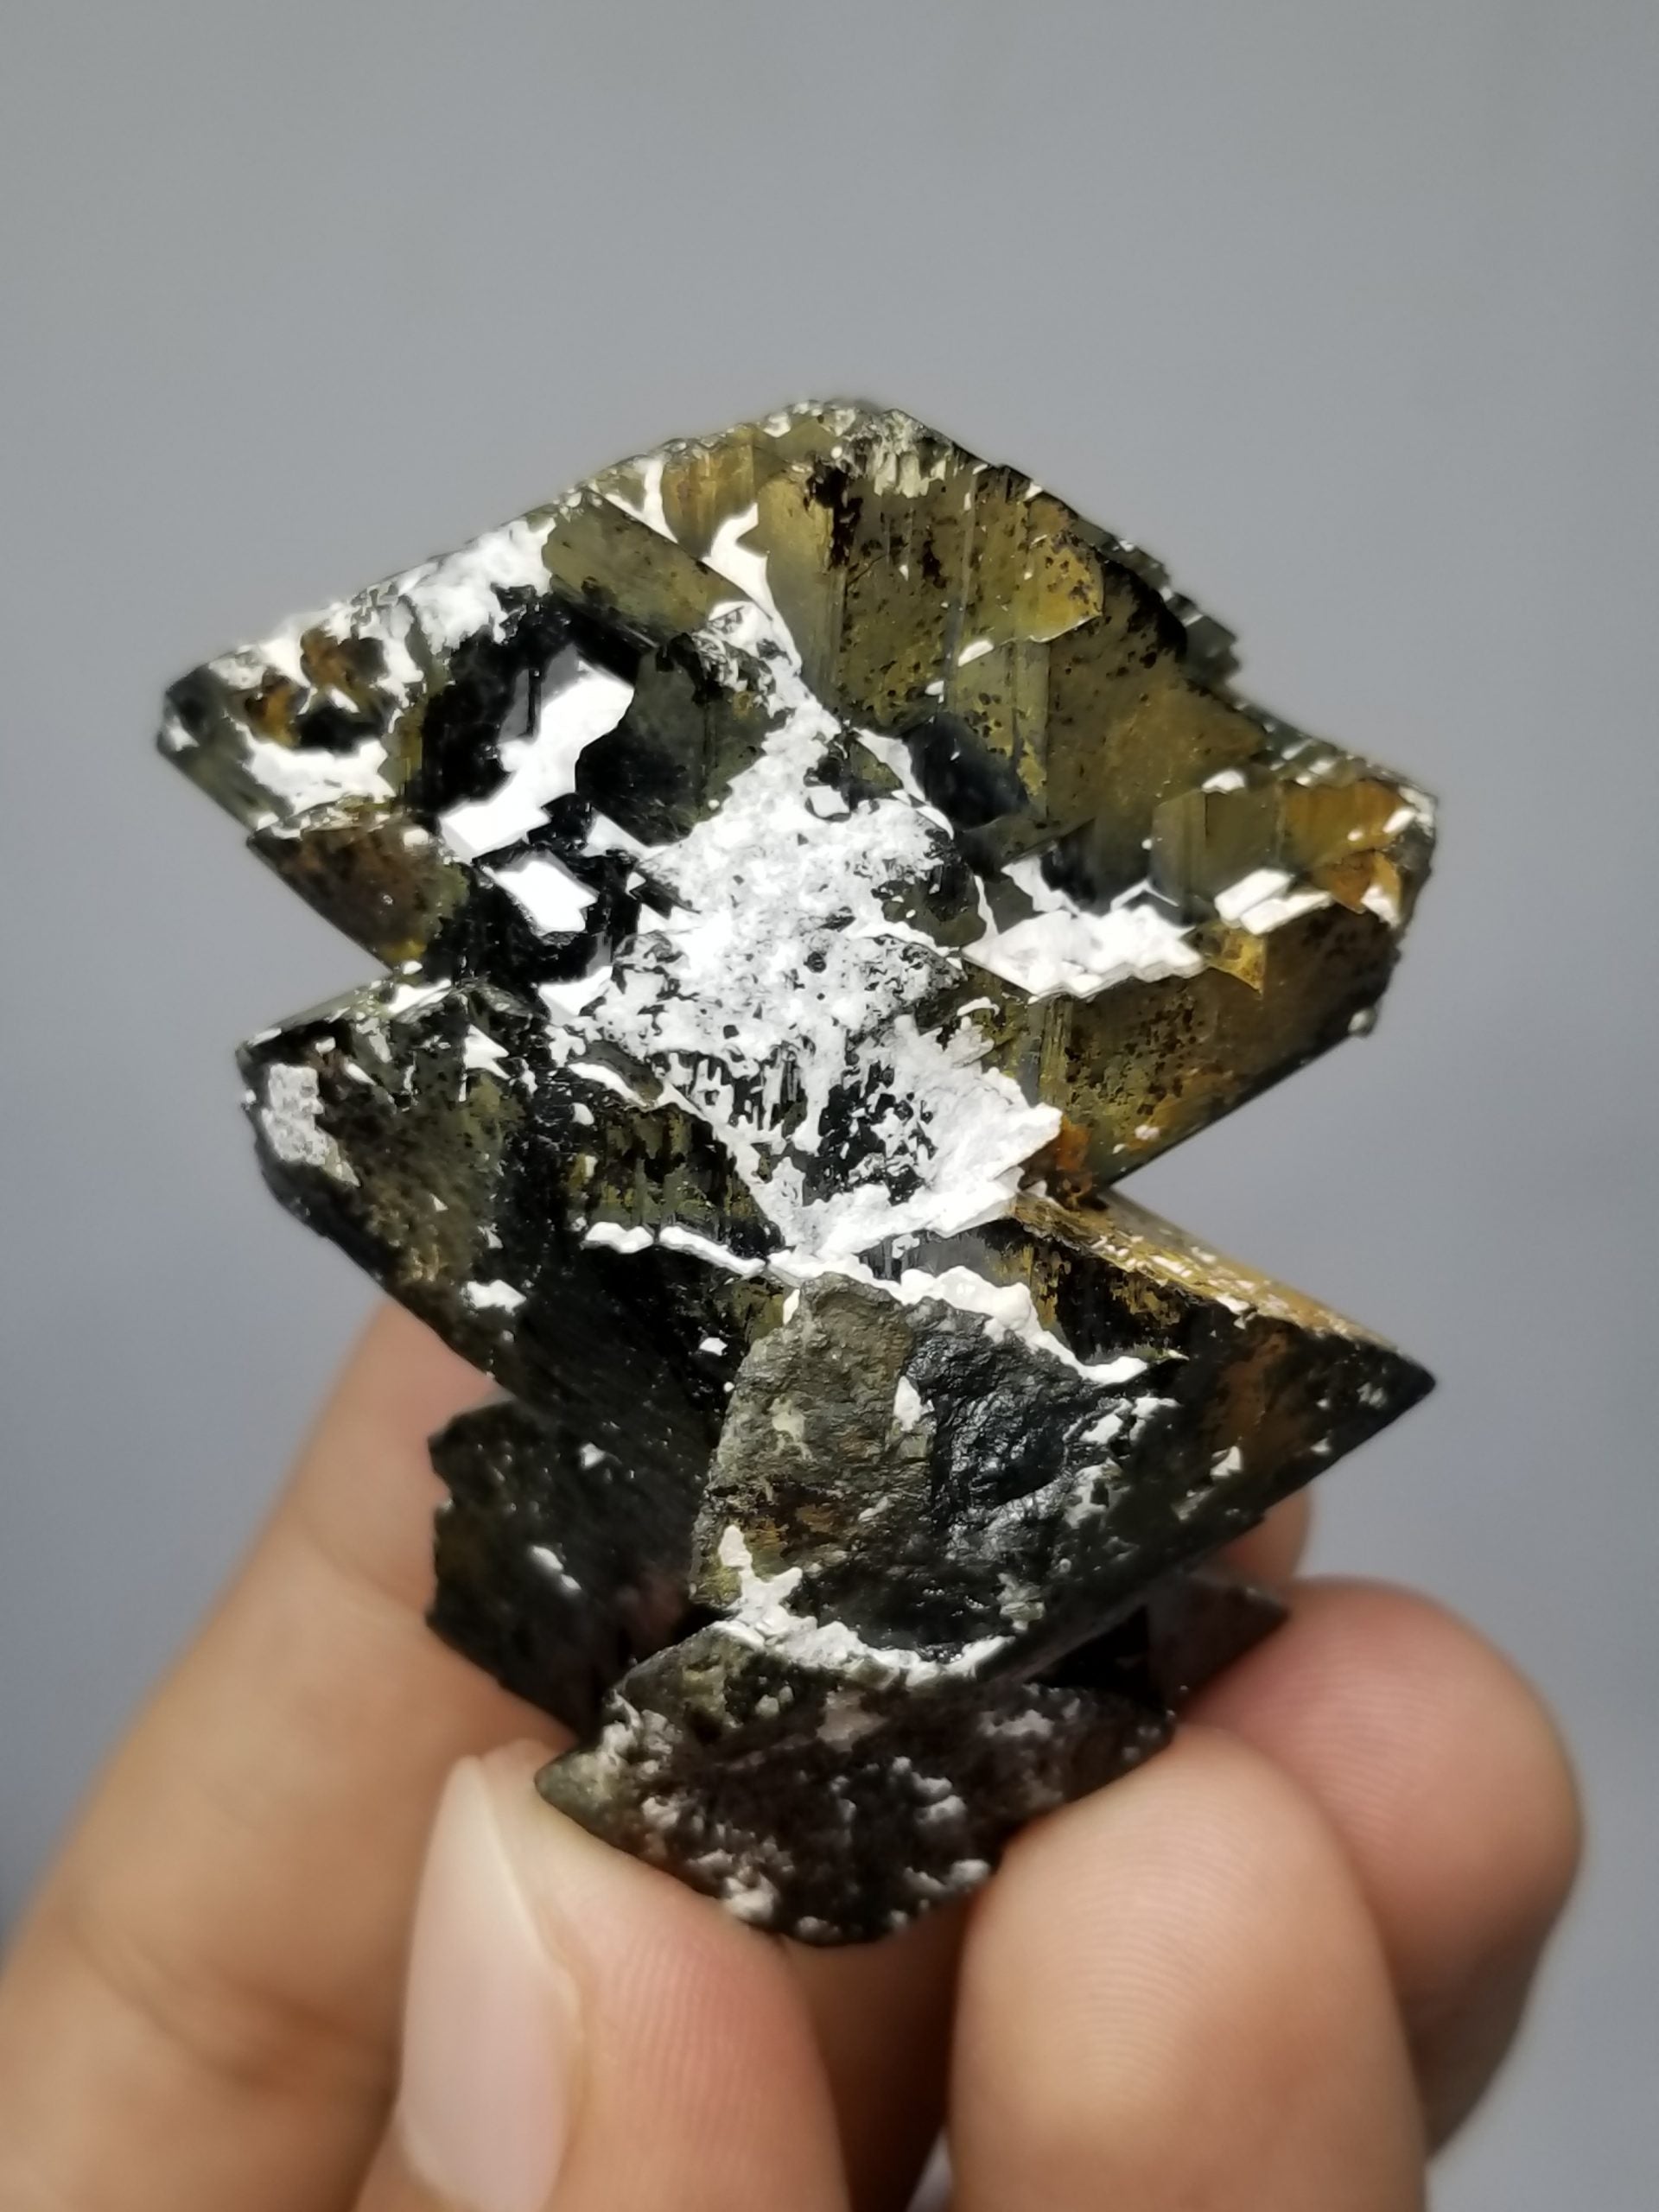 Cassiterite with nice crystal habit and shiny luster